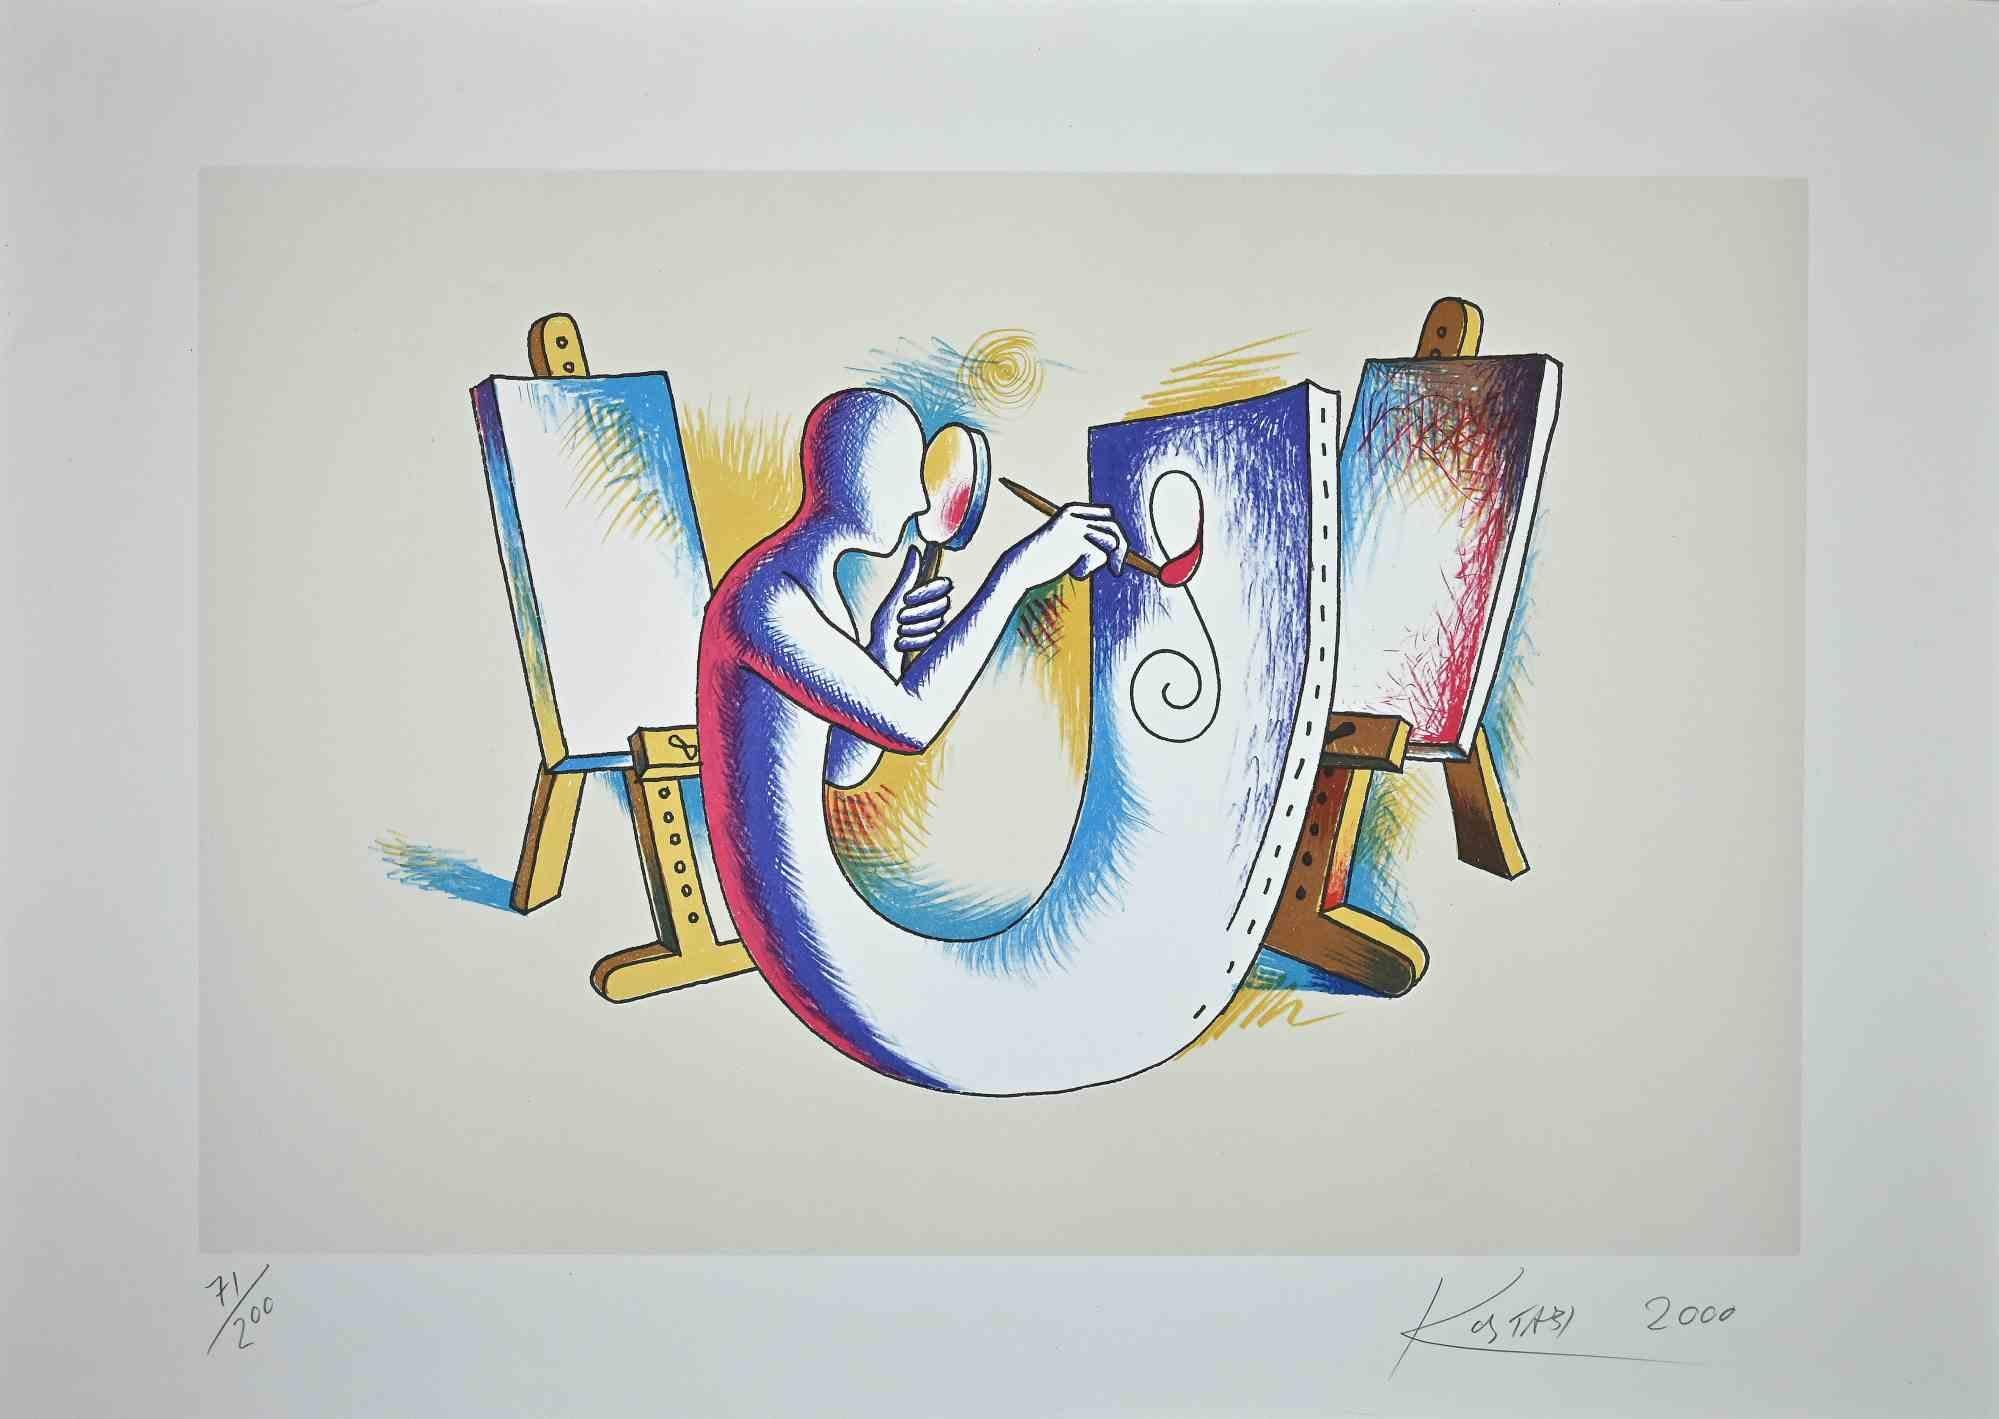 Mark Kostabi Figurative Print - The Painter's Atelier - Lithograph by M. Kostabi - 2000